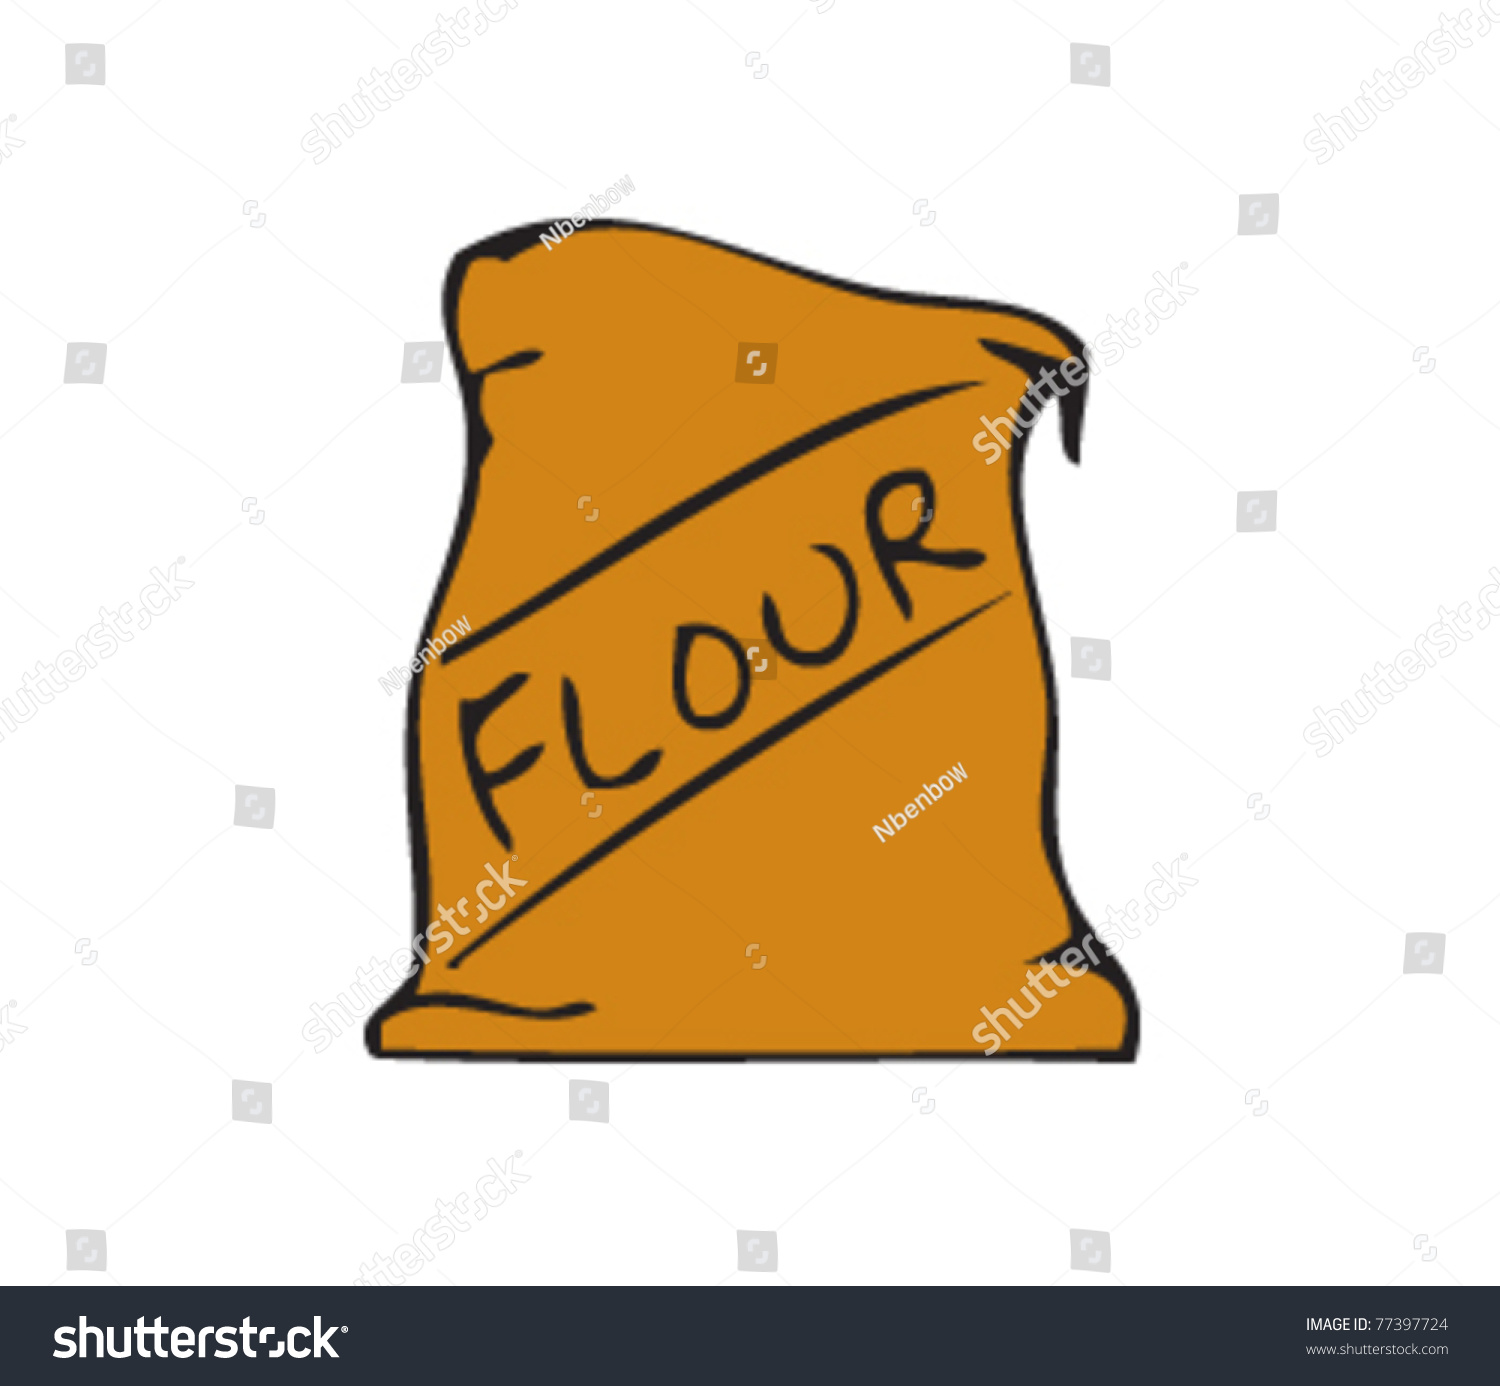 Drawing Of A Bag Of Flour Stock Vector Illustration 77397724 Shutterstock